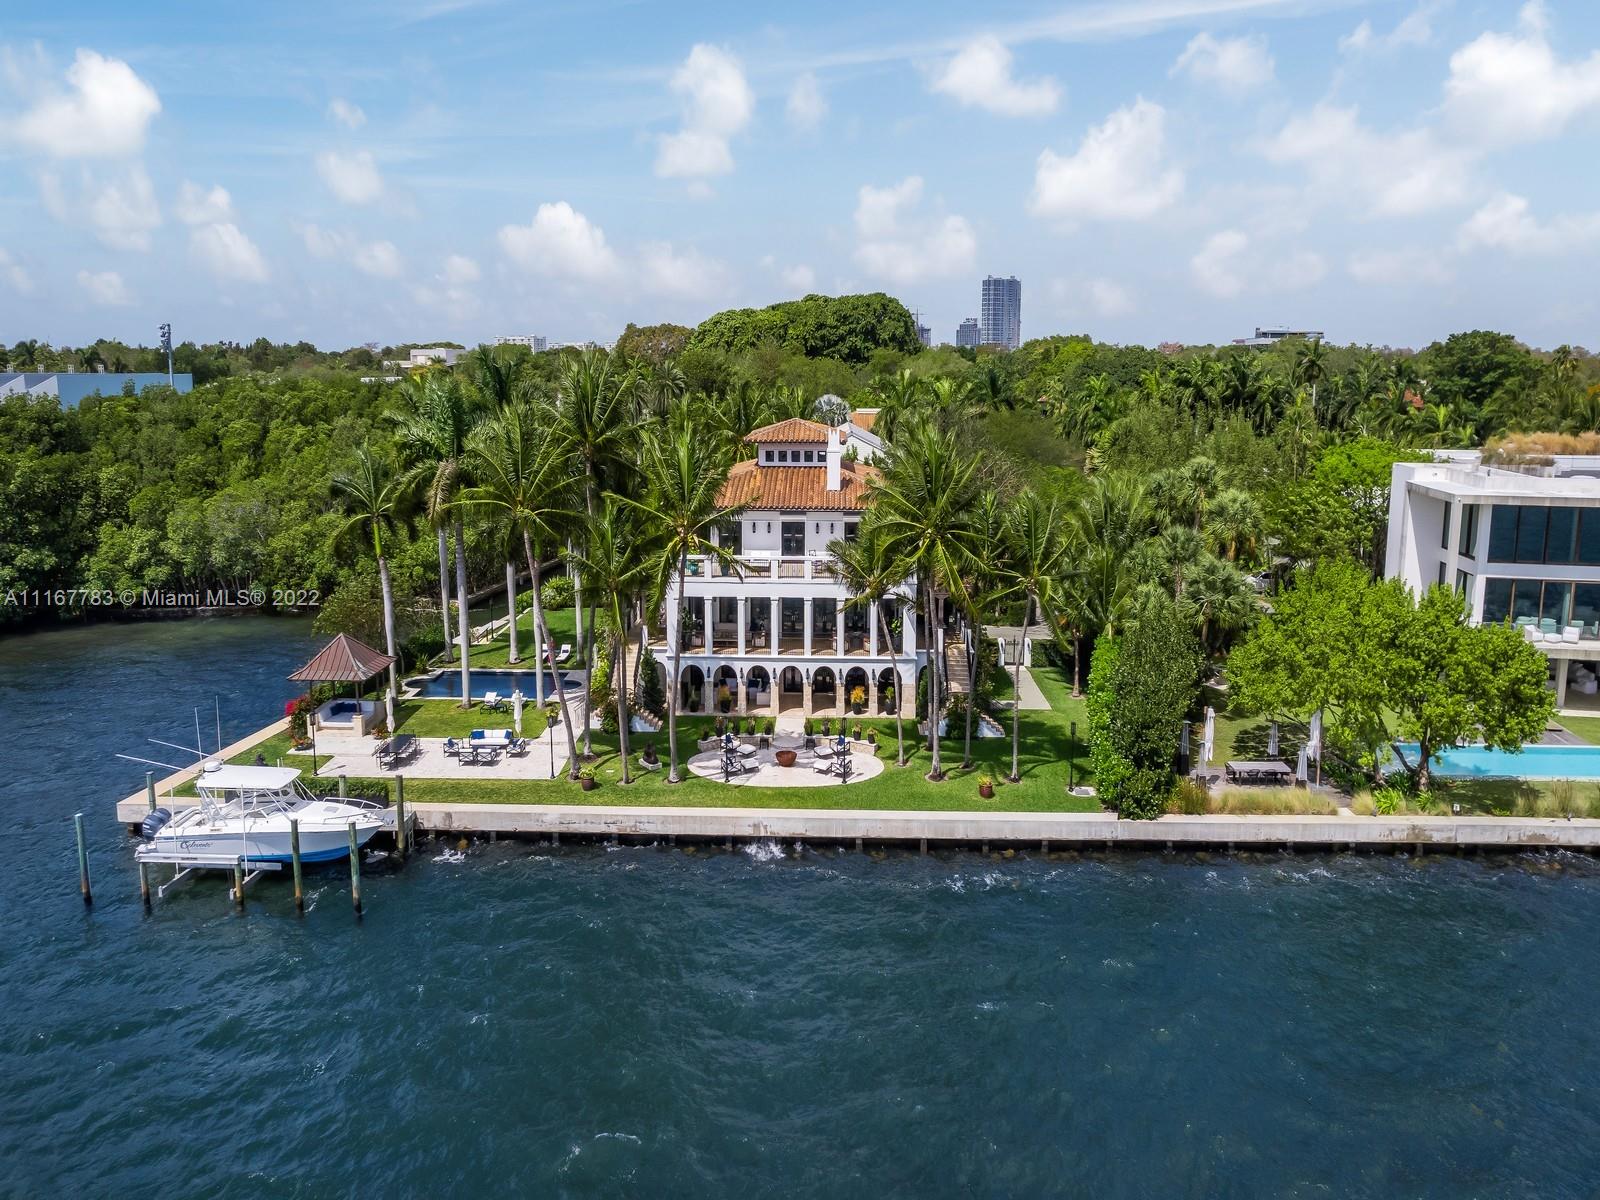 Located in a beautiful woodsy private enclave where only 26 homes enjoy its exclusivity, Camp Biscayne is one of Miami’s best kept secrets in the heart of Coconut Grove. Custom designed & built for its current owner, this 8 bedroom and 8.5 baths tri level gem was just renovated.  With over 300 ft of waterfront, a new Seawall, multiple entmt areas inside & out, this special house meets the most discerning demands of those who like to entertain & experience liv. one’s best life on the open Bay in Miami. The interior layout offers 180-degree views of Sailboat Bay, a true chef’s kitchen, Jerusalem stone flrs in liv. areas & Mahogany wood flrs adding a cozy & warming feeling to each room. Meticulous details & finishes as well as soaring 30 ft coffered ceiling & many more added features.